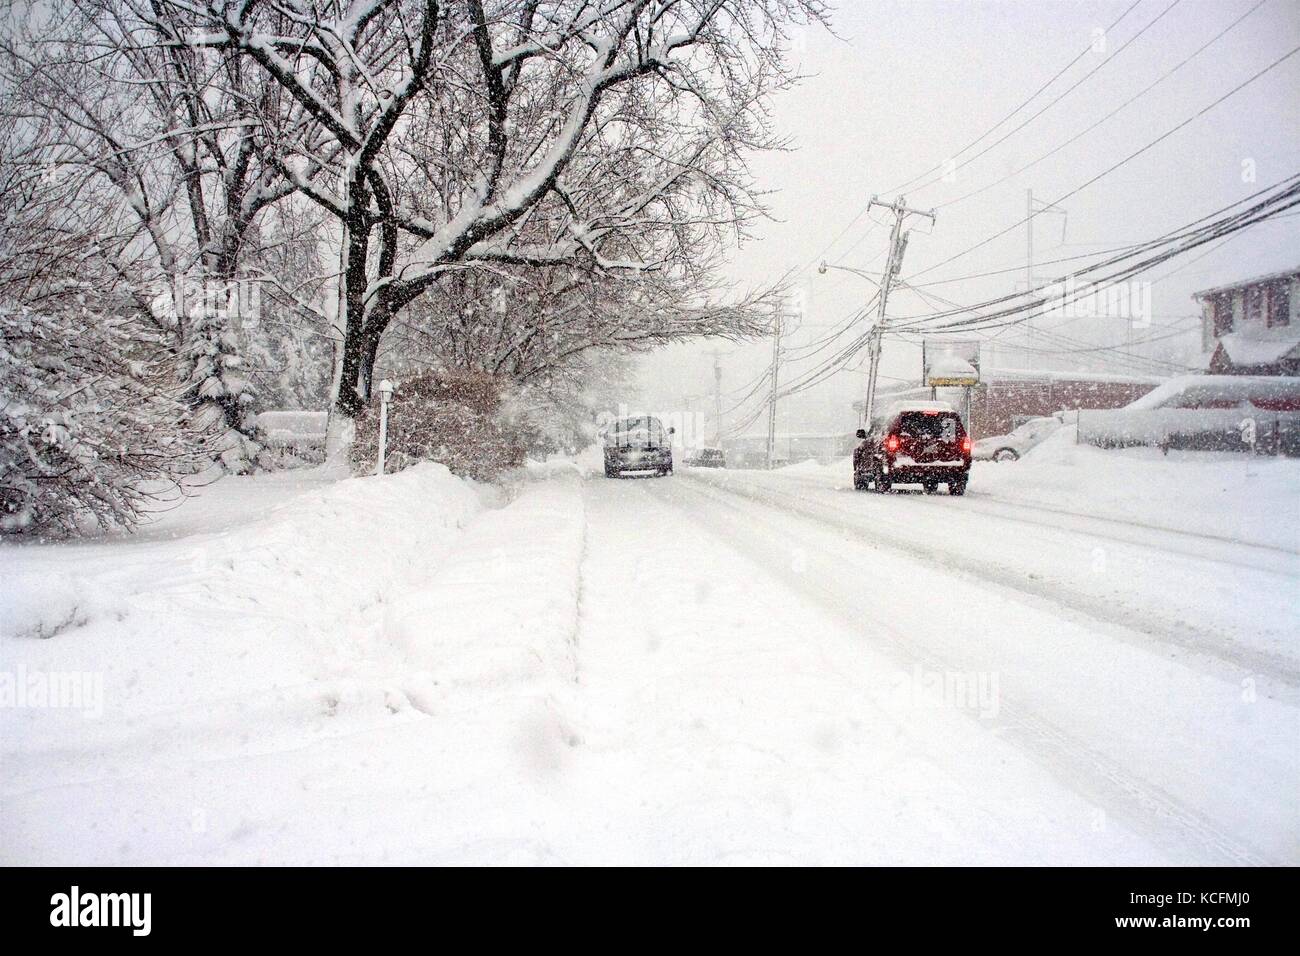 Snow plows work hard to clear deep snow on roads following a blizzard. Stock Photo